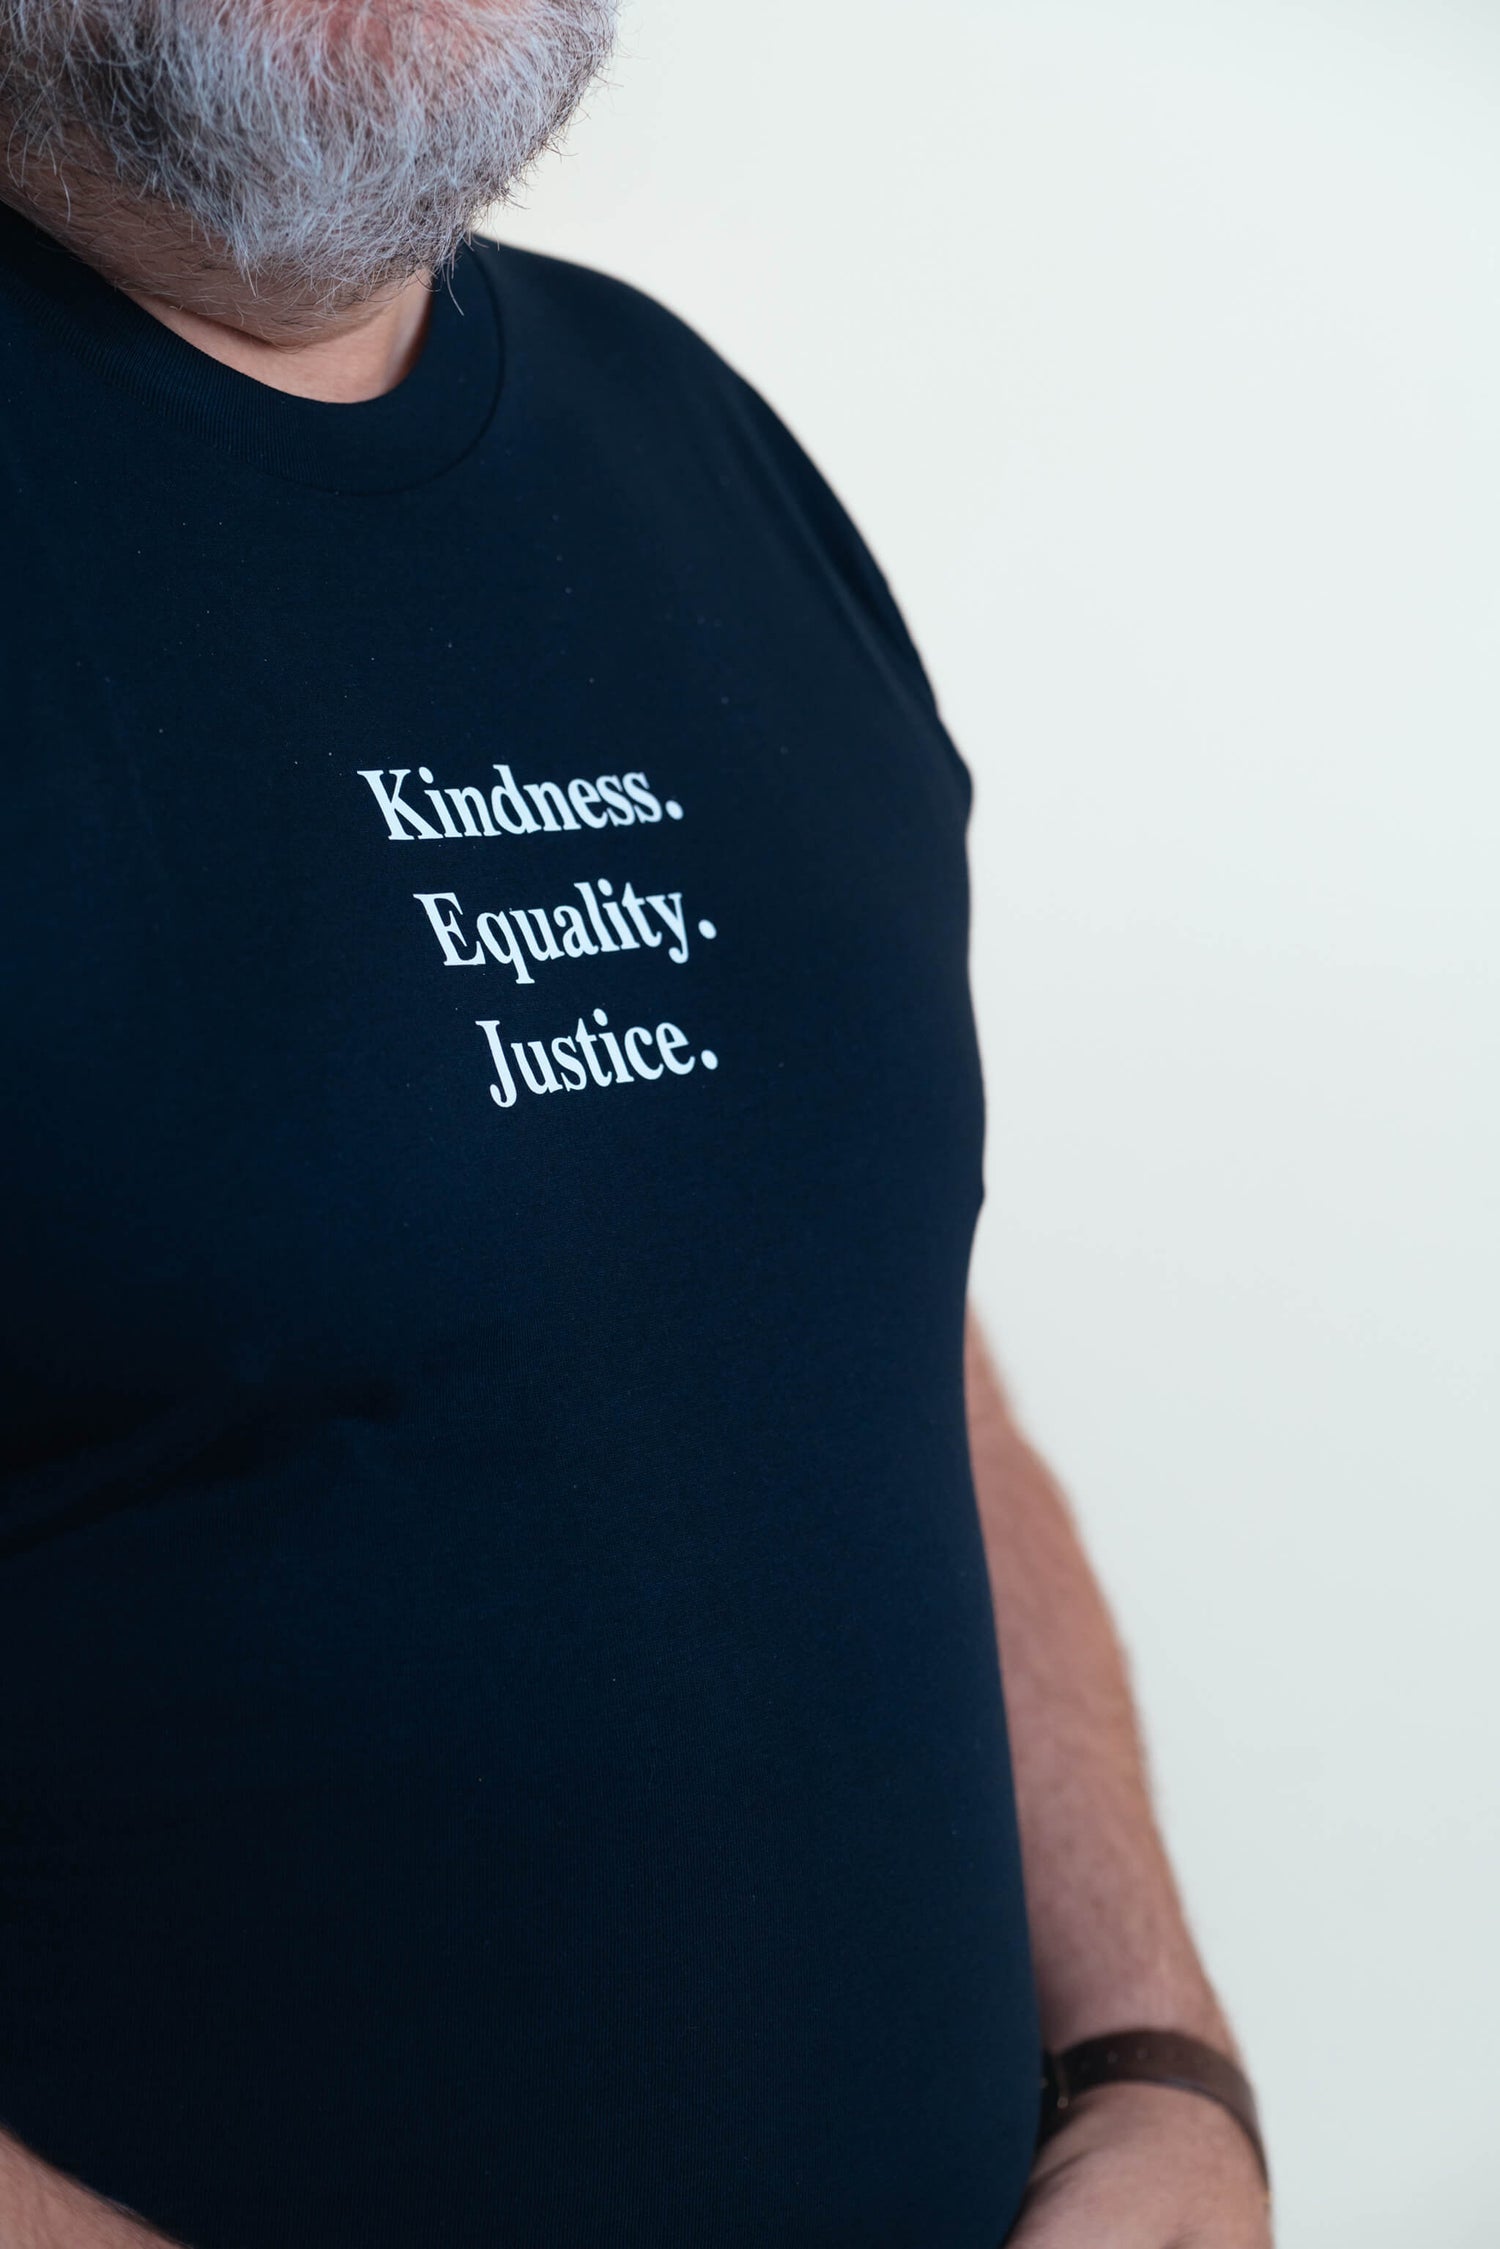 Close up on Steve wearing an ink blue tshirt with the words 'Kindness Equality Justice.' written in white.